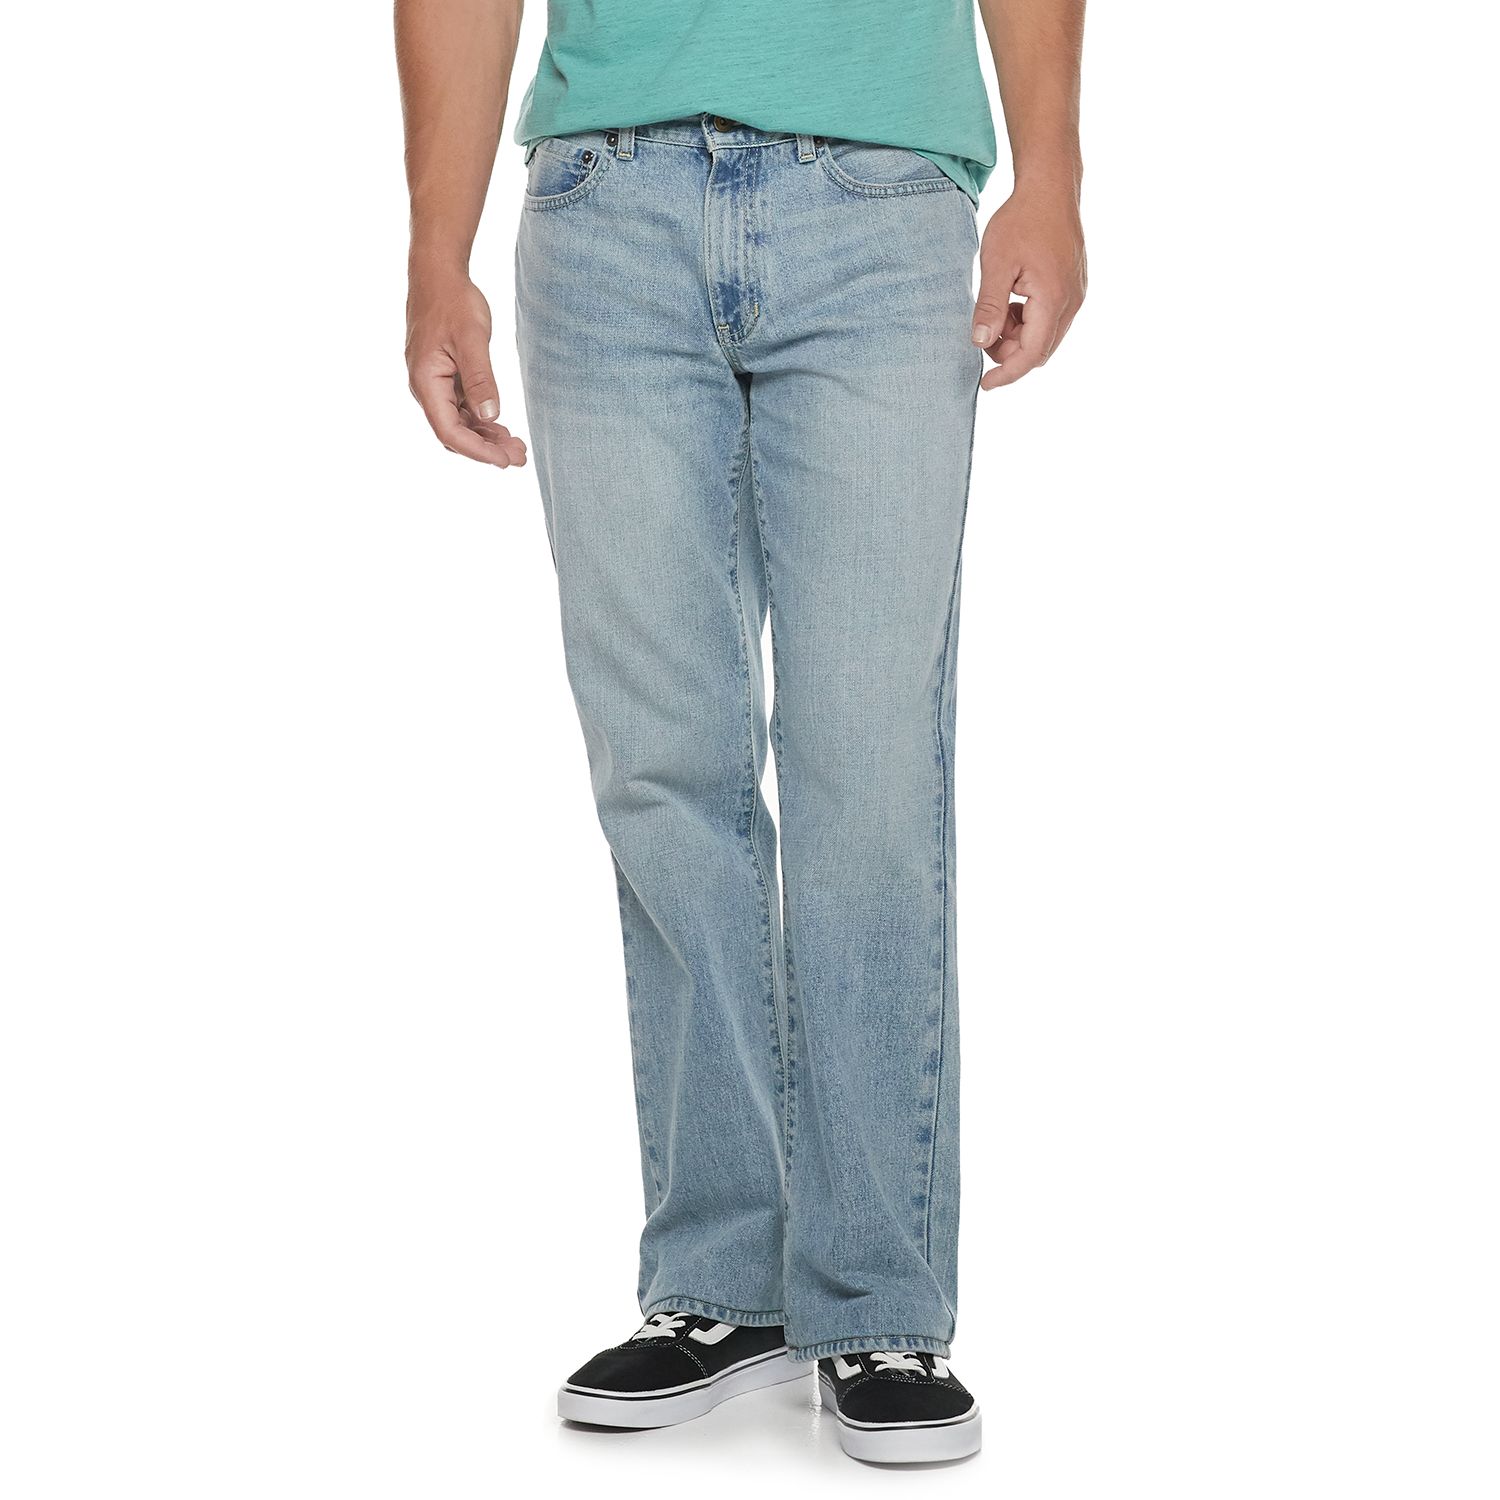 grey bootcut jeans mens